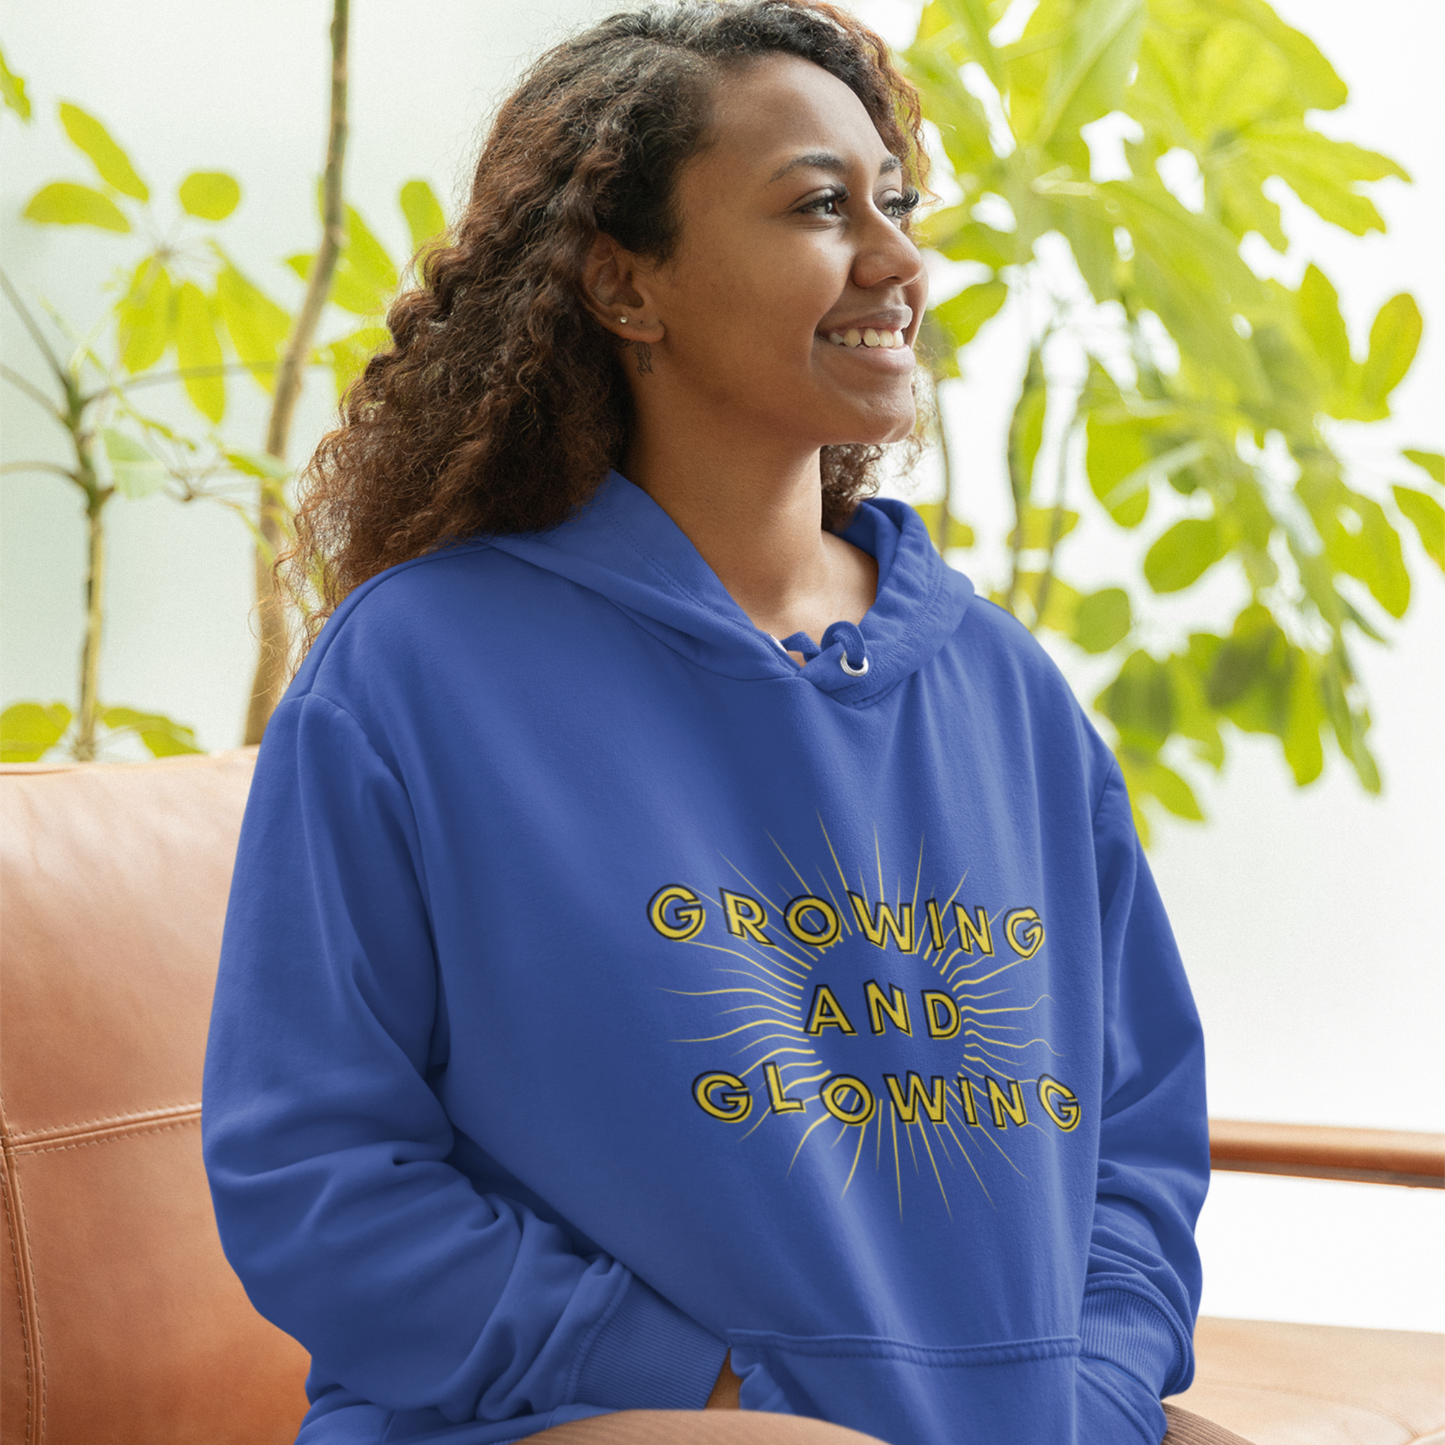 Growing and Glowing (Graphic Yellow Text with Sun Burst) Unisex Heavy Blend Hoodie - Style: Gildan 18500